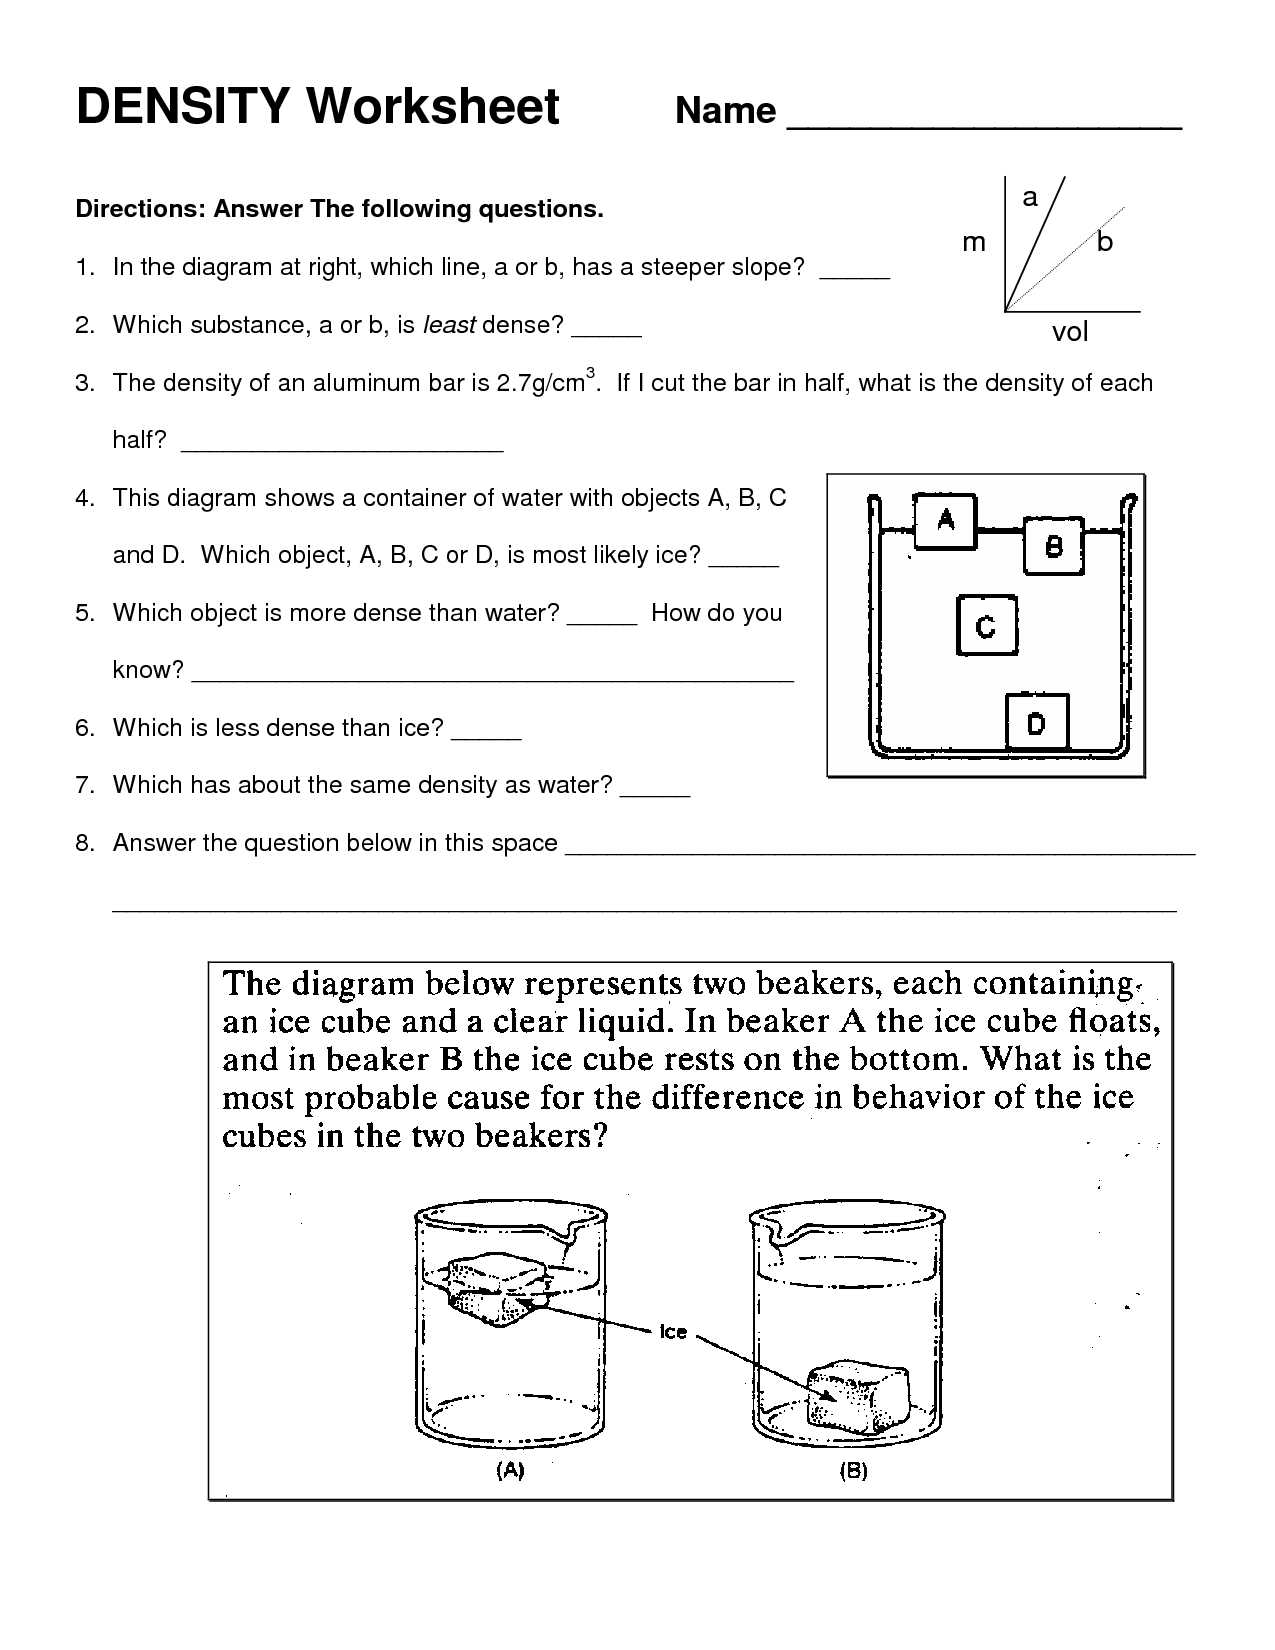 Density Worksheet Answers Chemistry together with 20 Beautiful Density Worksheet Define Mass Pics